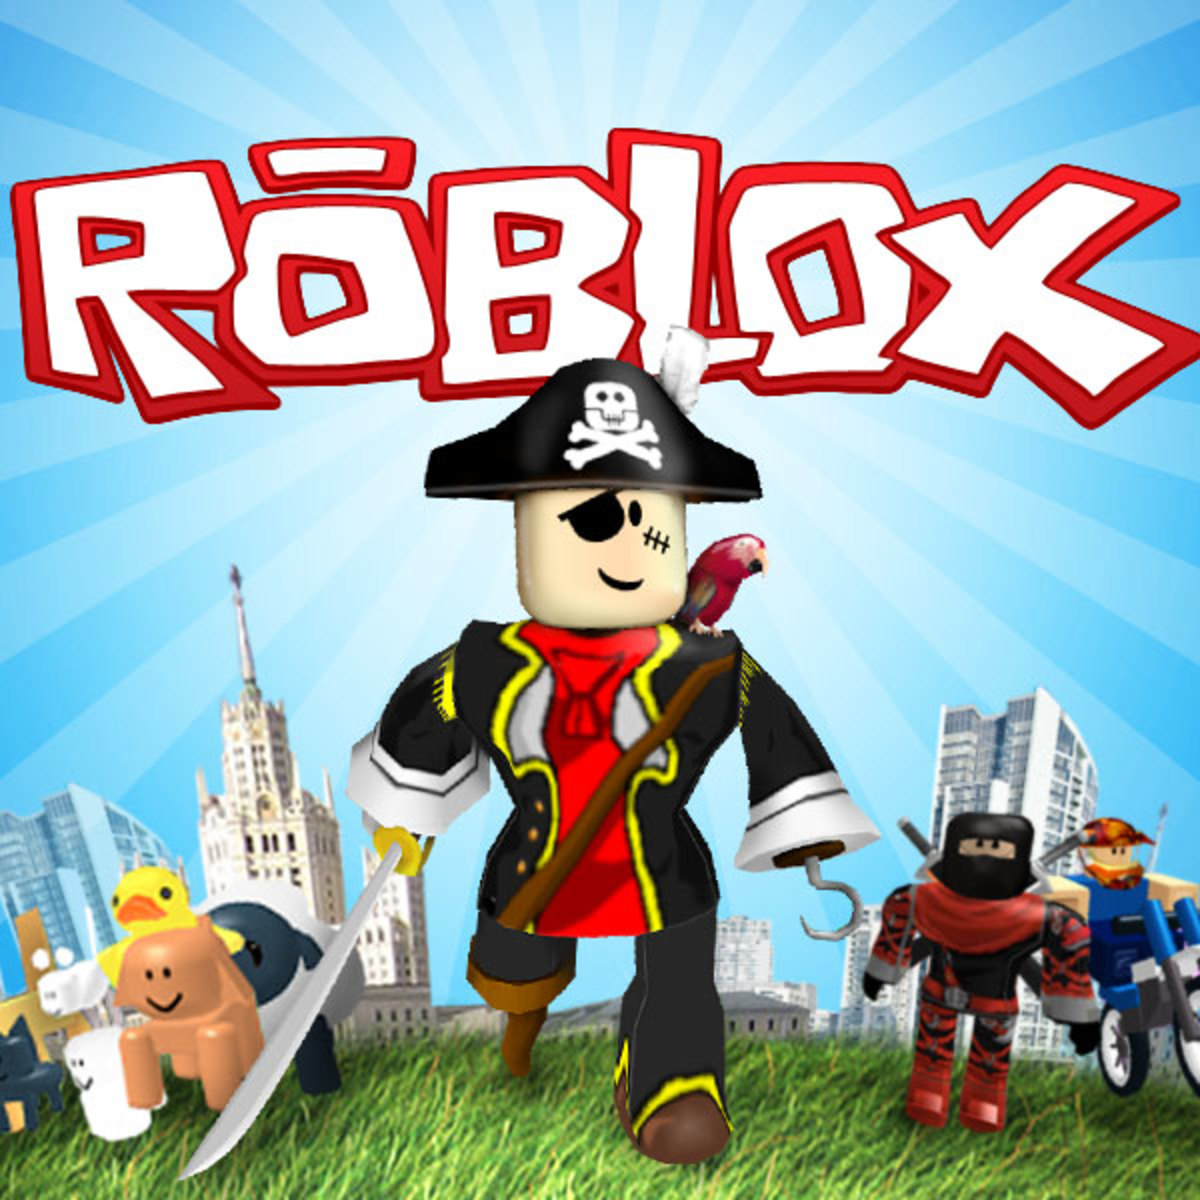 18 Games Like Minecraft Free And Paid Fun Sandbox Building Games Hubpages - roblox aether commands list r bown hack robux